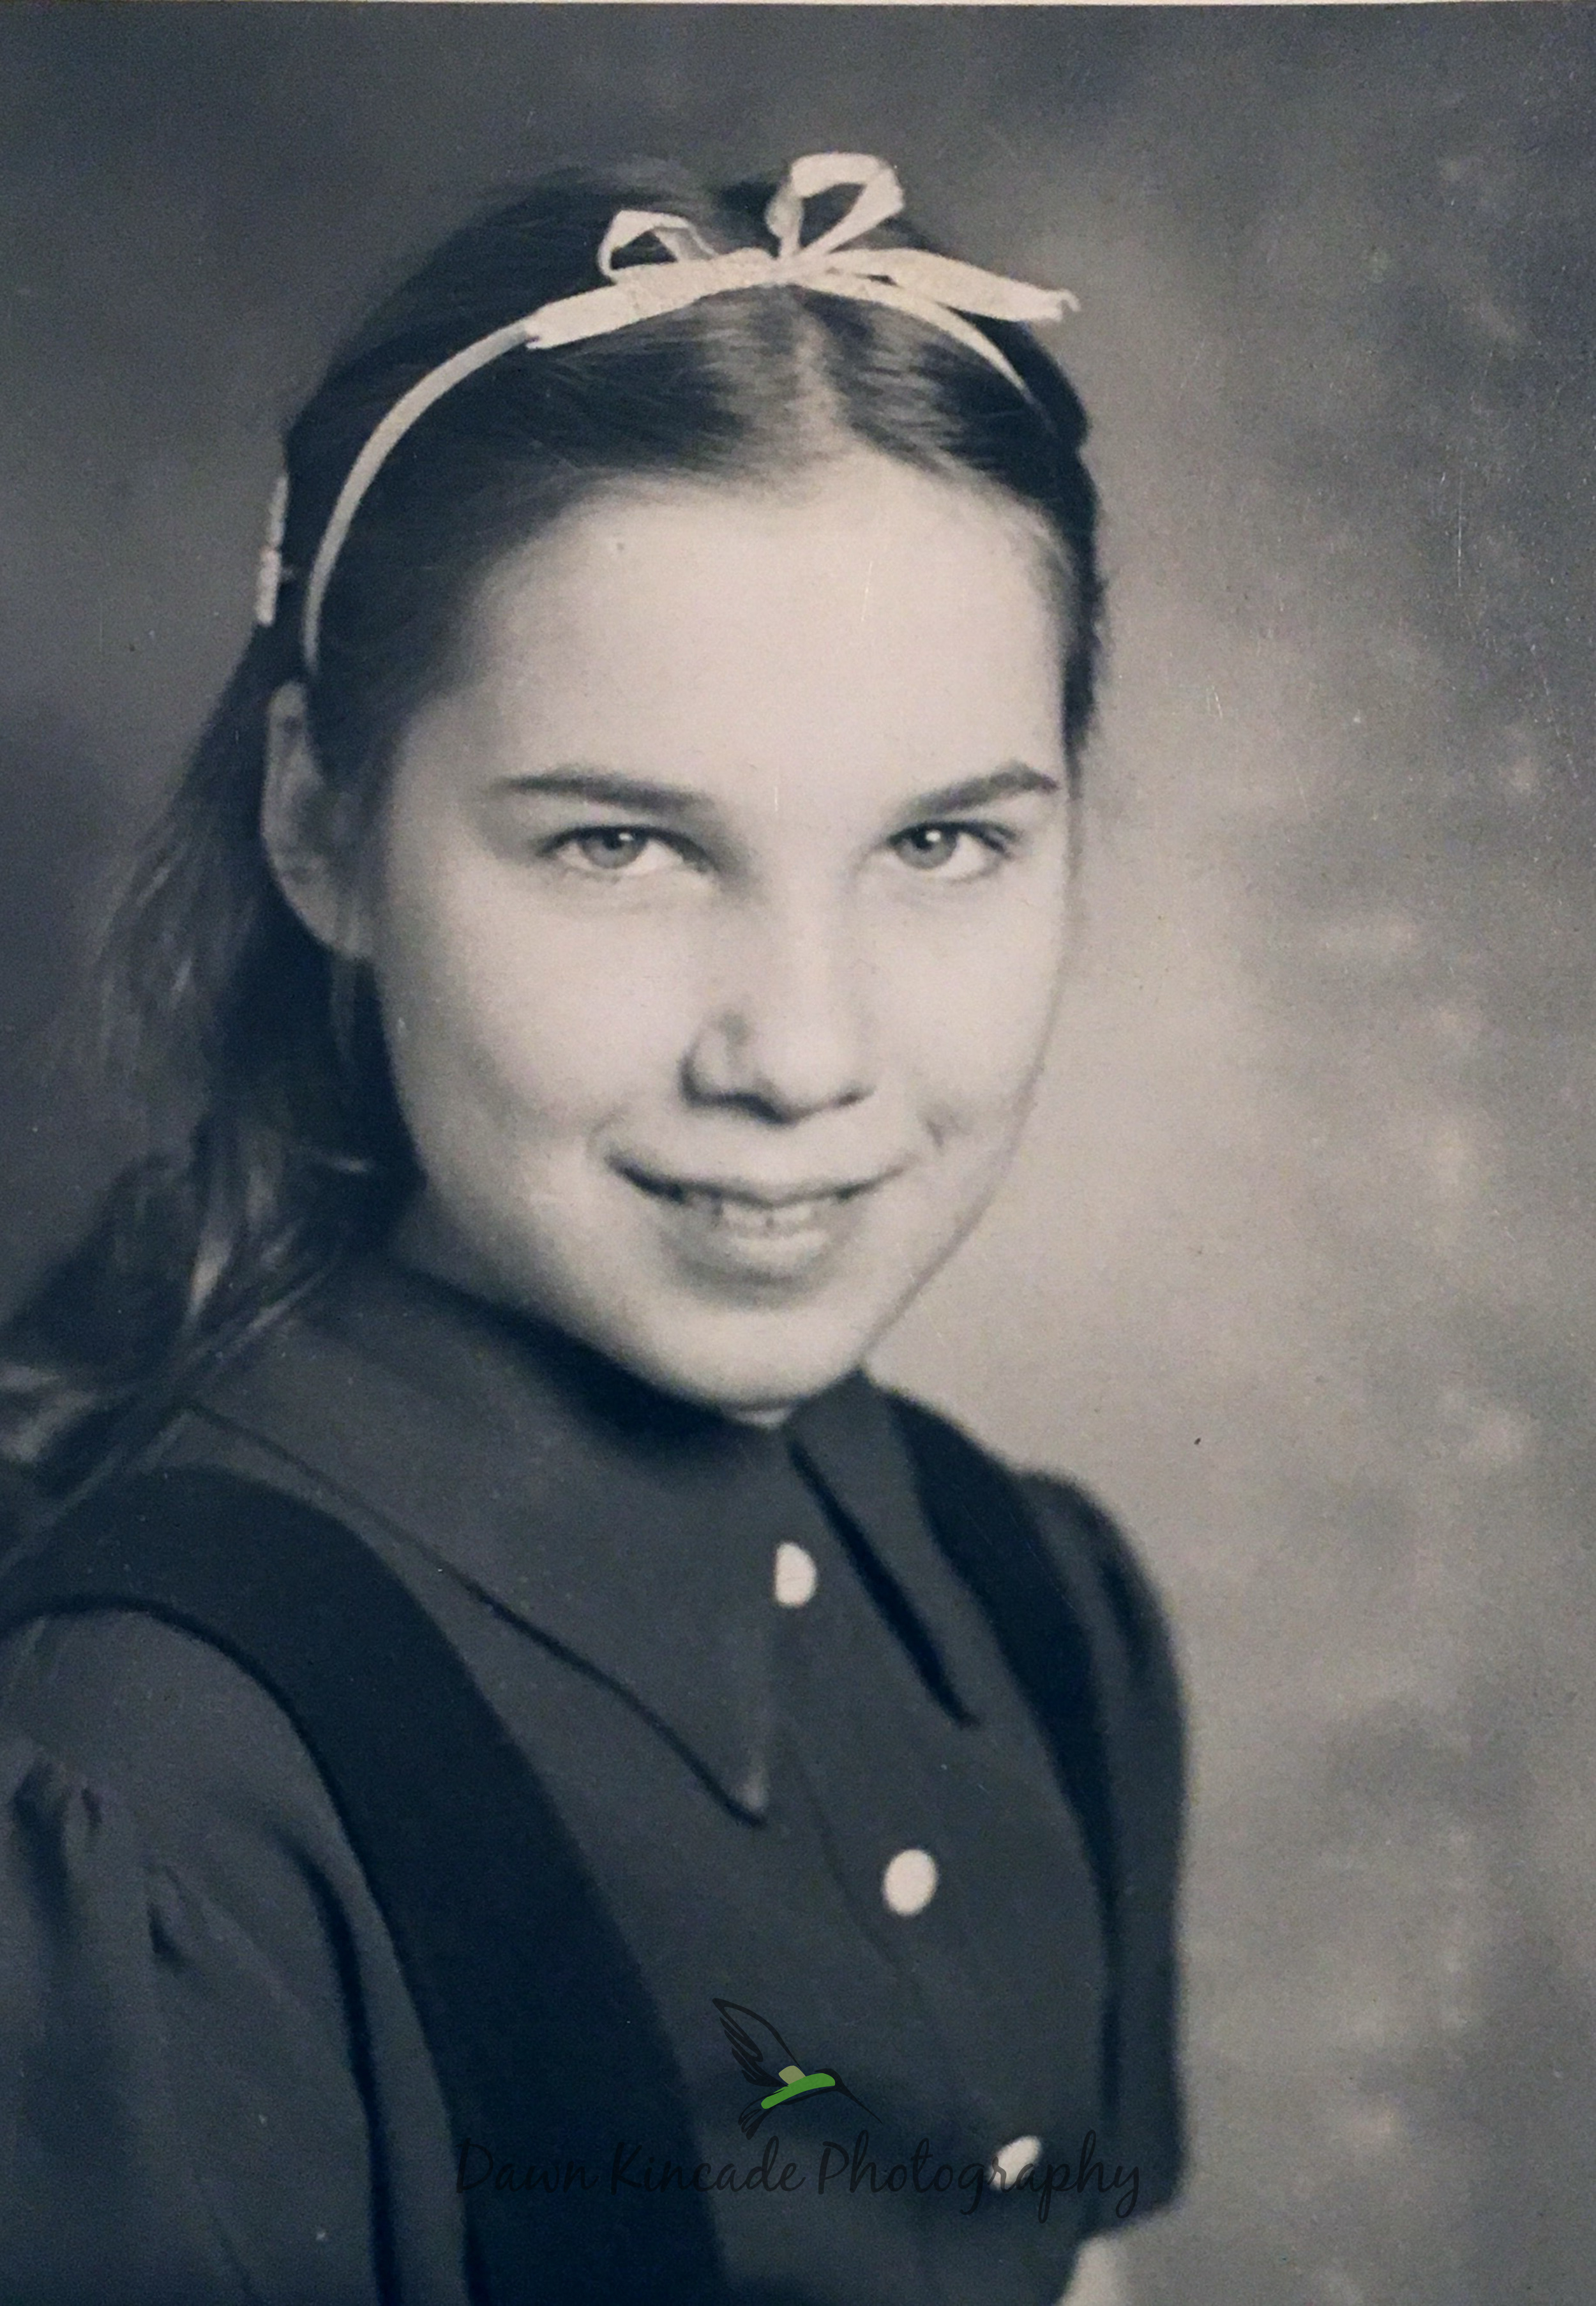 My Mom as a young girl. This is not a photo that I took. This is a scanned copy of an original that photo.